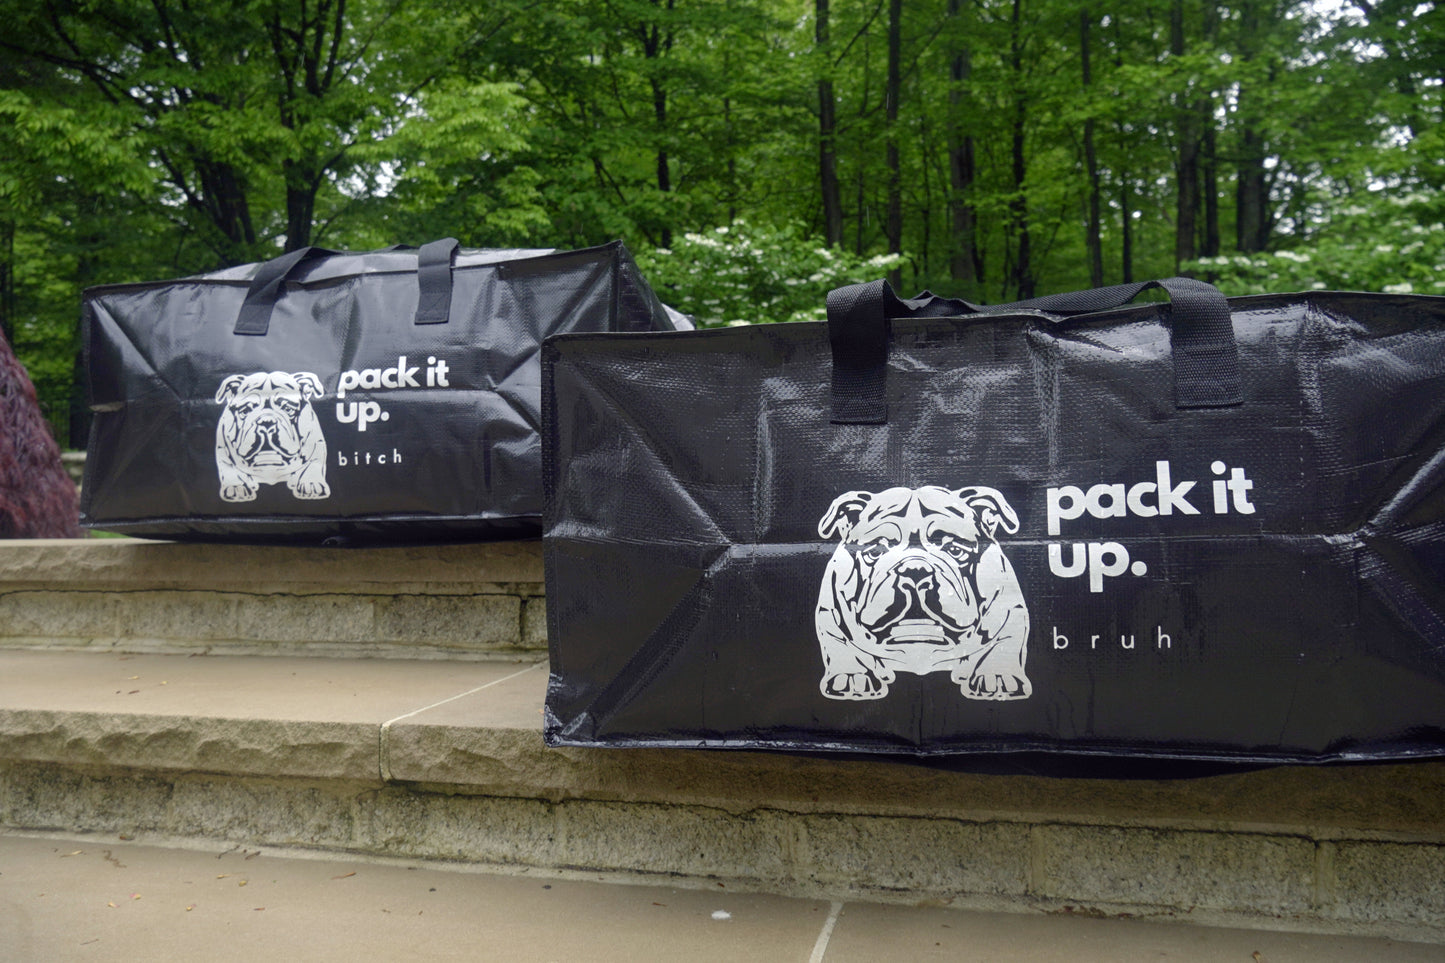 two black rectangular bags with text "pack it up bruh" and "pack it up bitch" and black and white bulldog logo on the side.